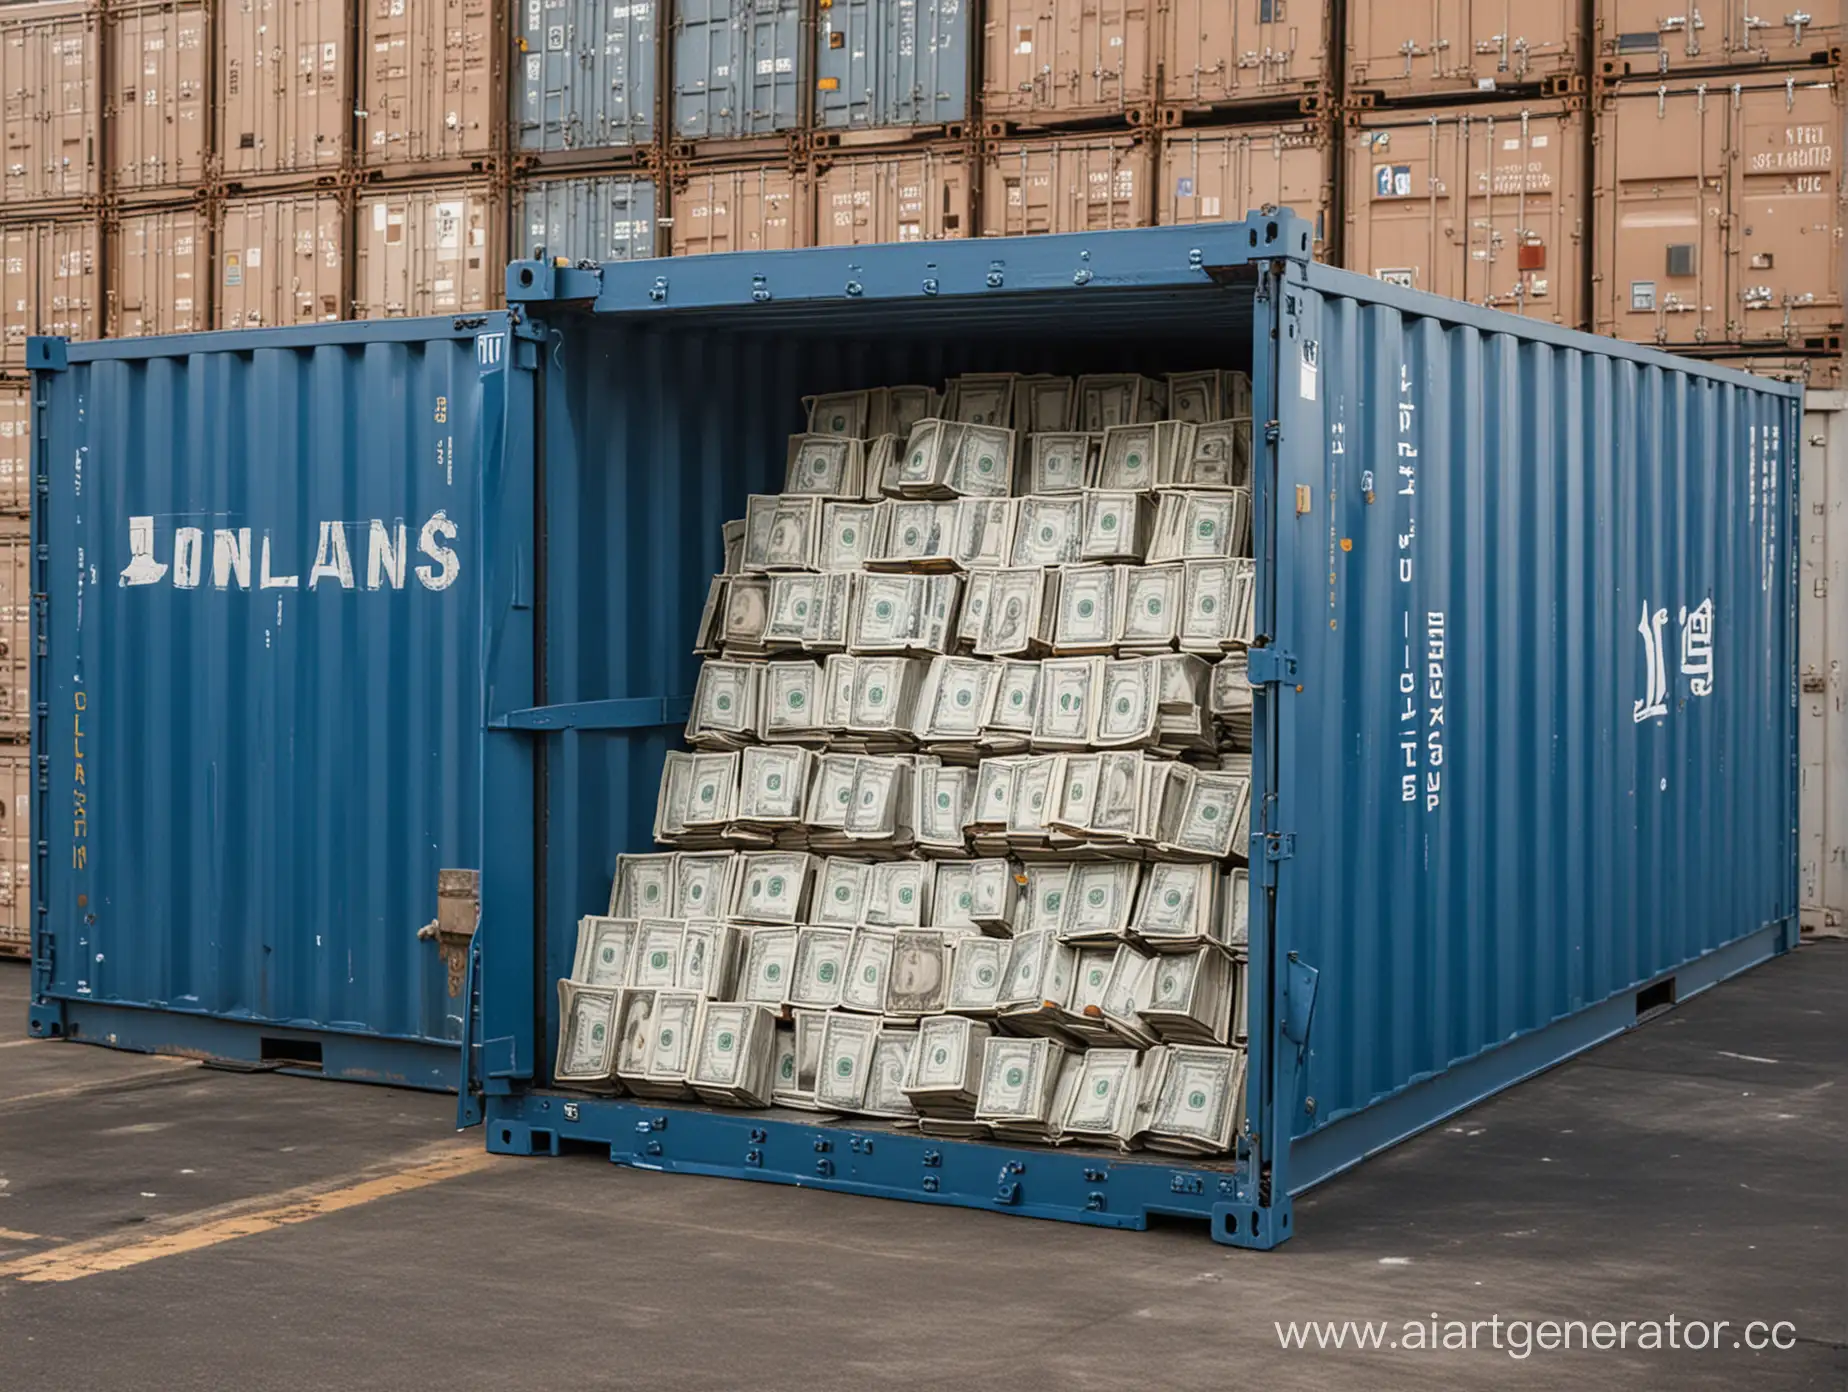 Cargo-Port-with-a-Blue-Shipping-Container-Overflowing-with-Dollars